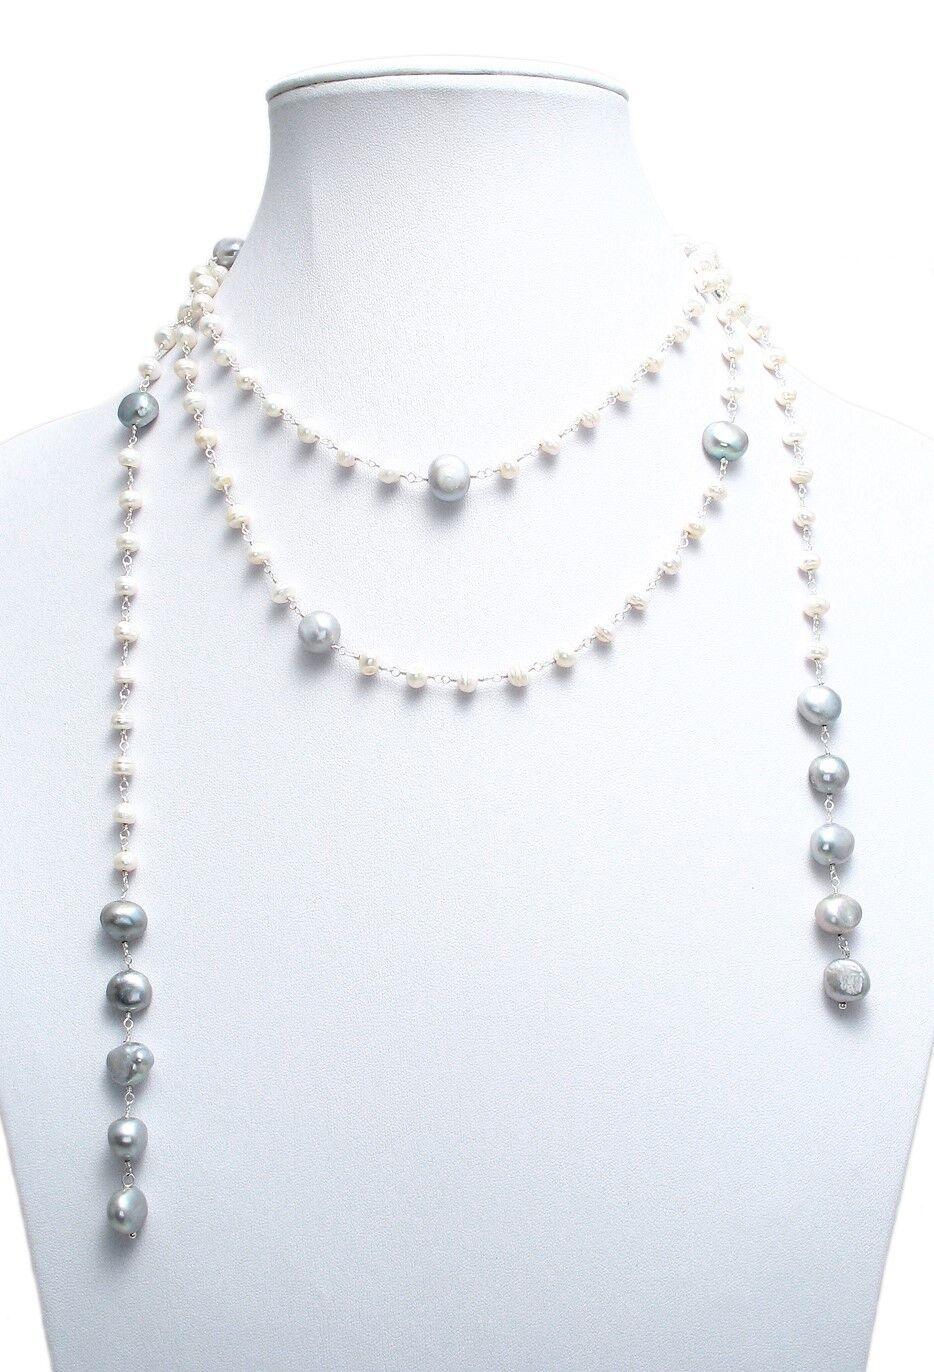 Genuine Freshwater Pearl Necklace Long Wrap 56